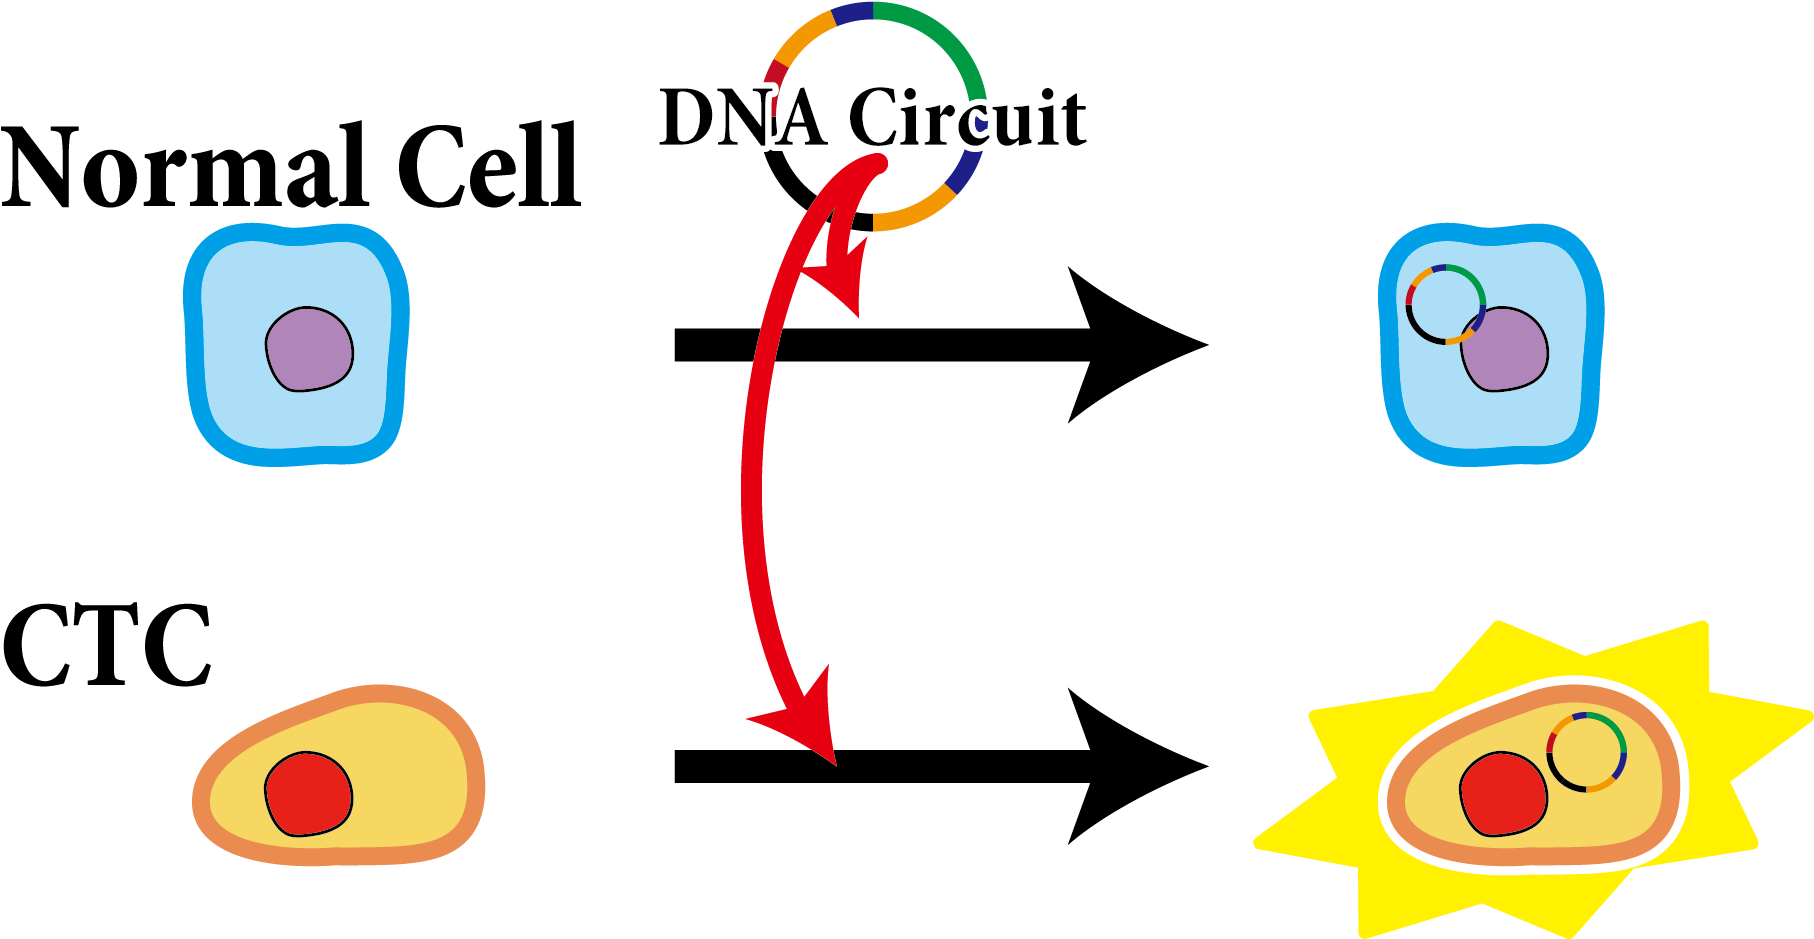 If We Introduce This Circuit Into Cells In Blood, Only - If We Introduce This Circuit Into Cells In Blood, Only (1920x1080)